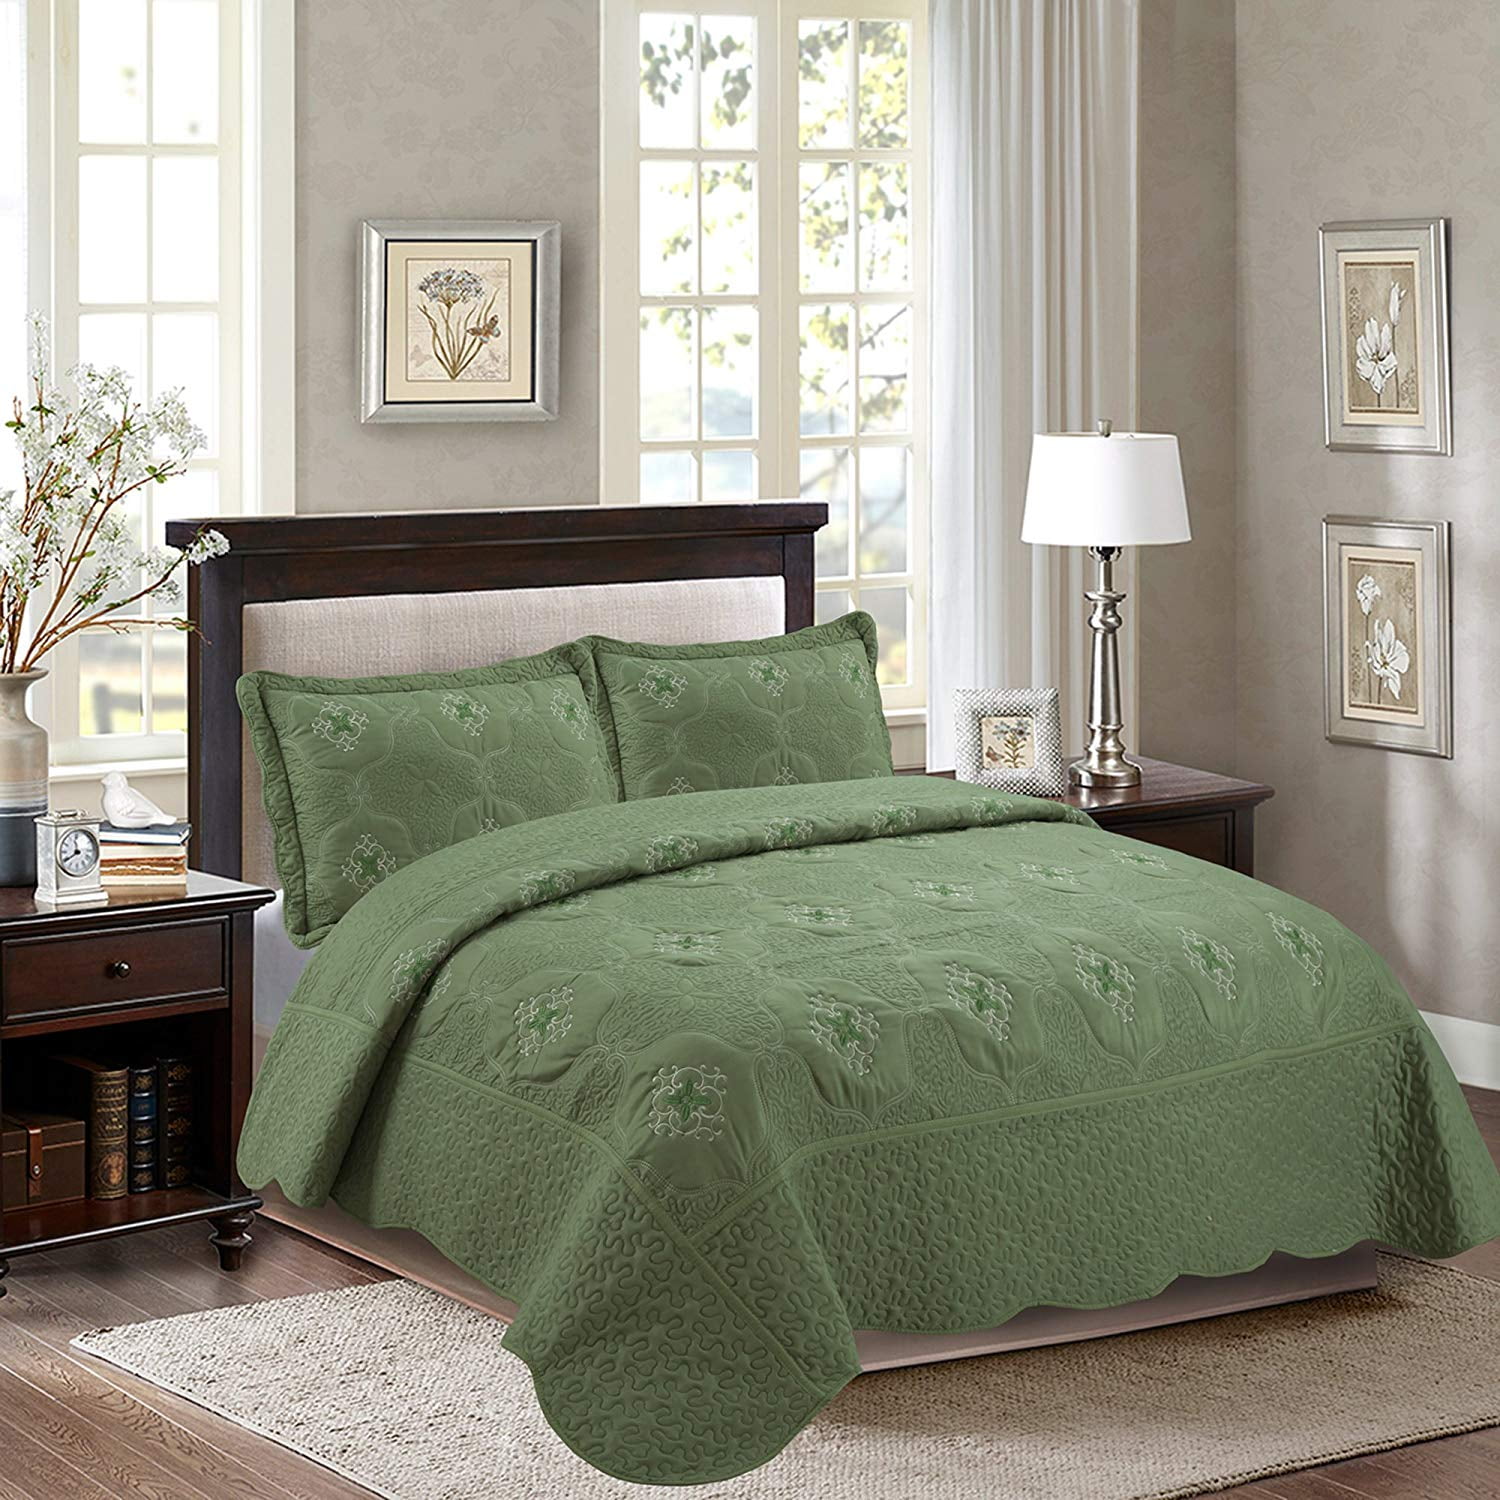 Marcielo 3 Piece Fully Quilted, Green Cal King Bedding